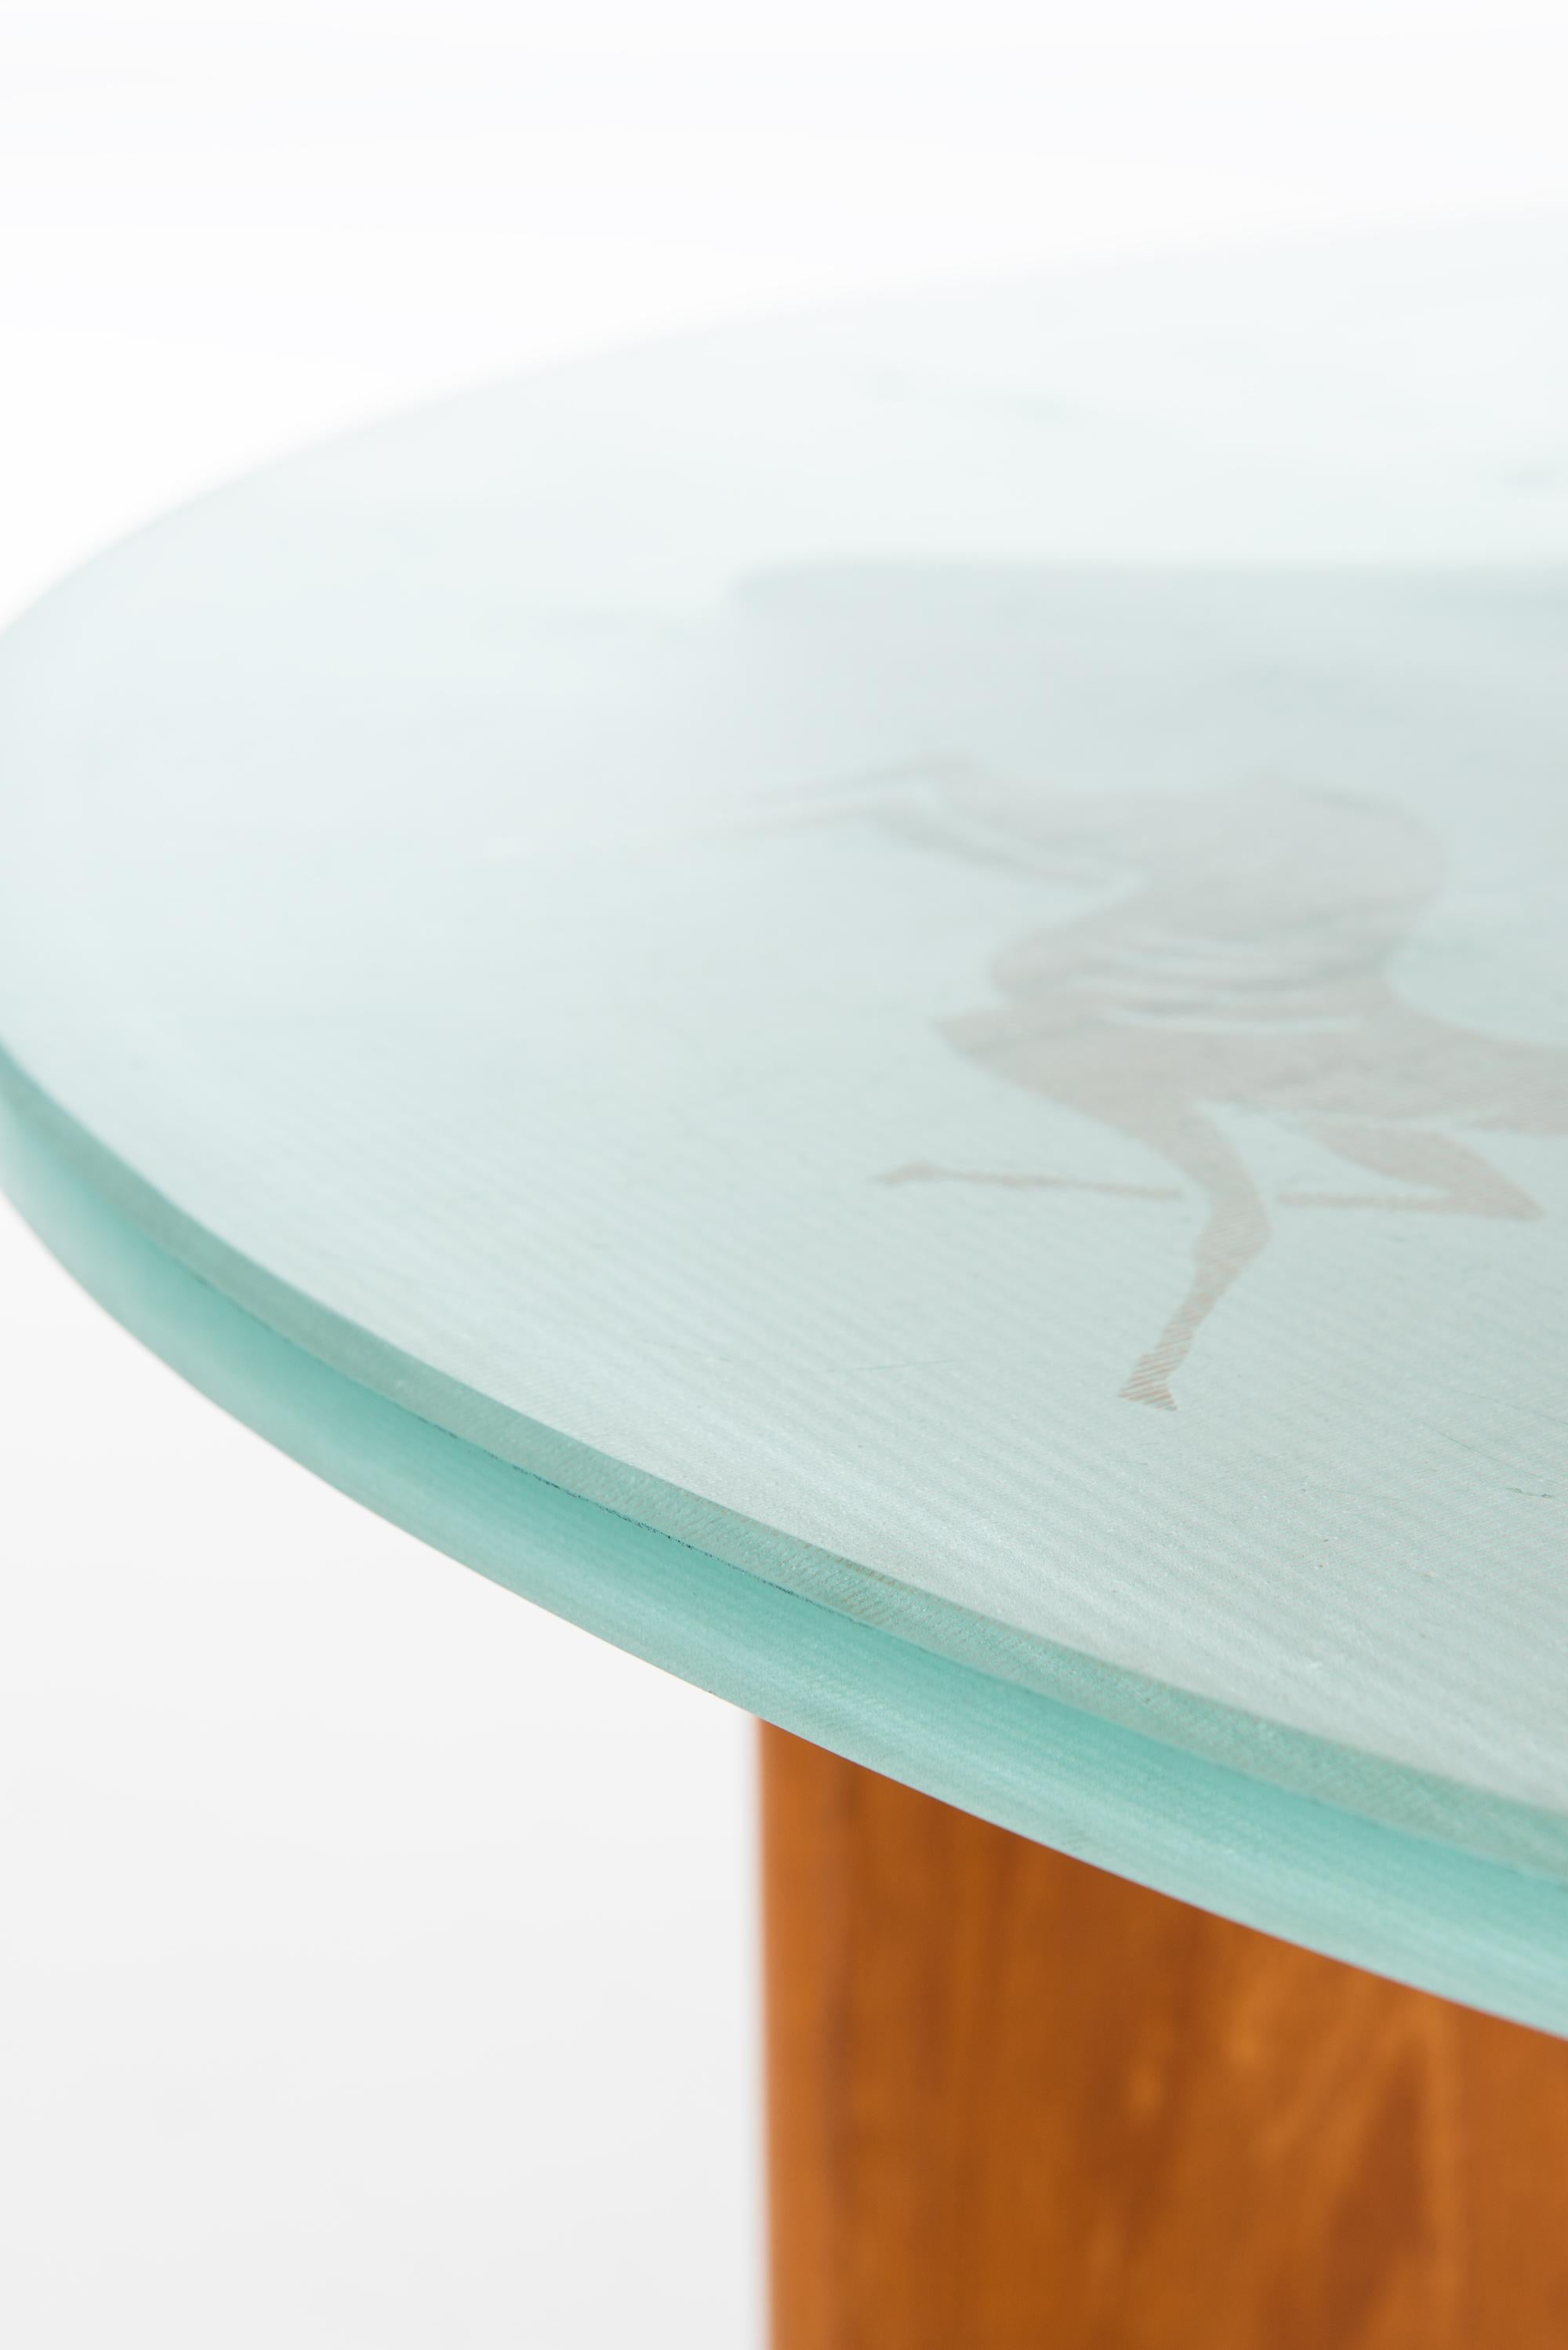 Rare coffee table with elm and glass. Produced by Reiners möbelfabrik in Mjölby, Sweden.